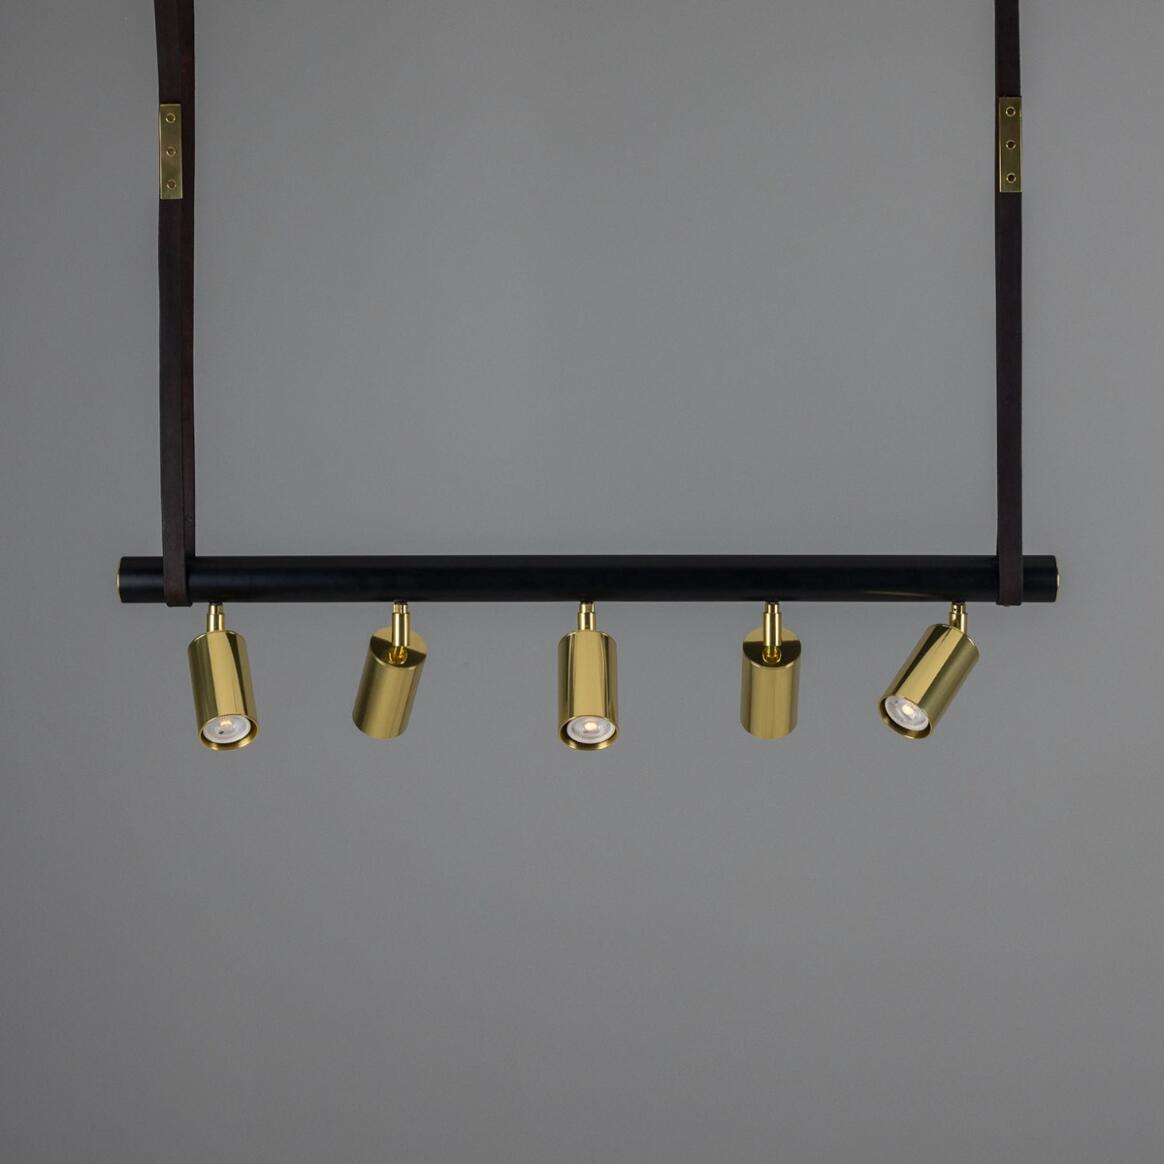 Holmes Linear Island Pendant with Leather Straps, Five-Light main product image